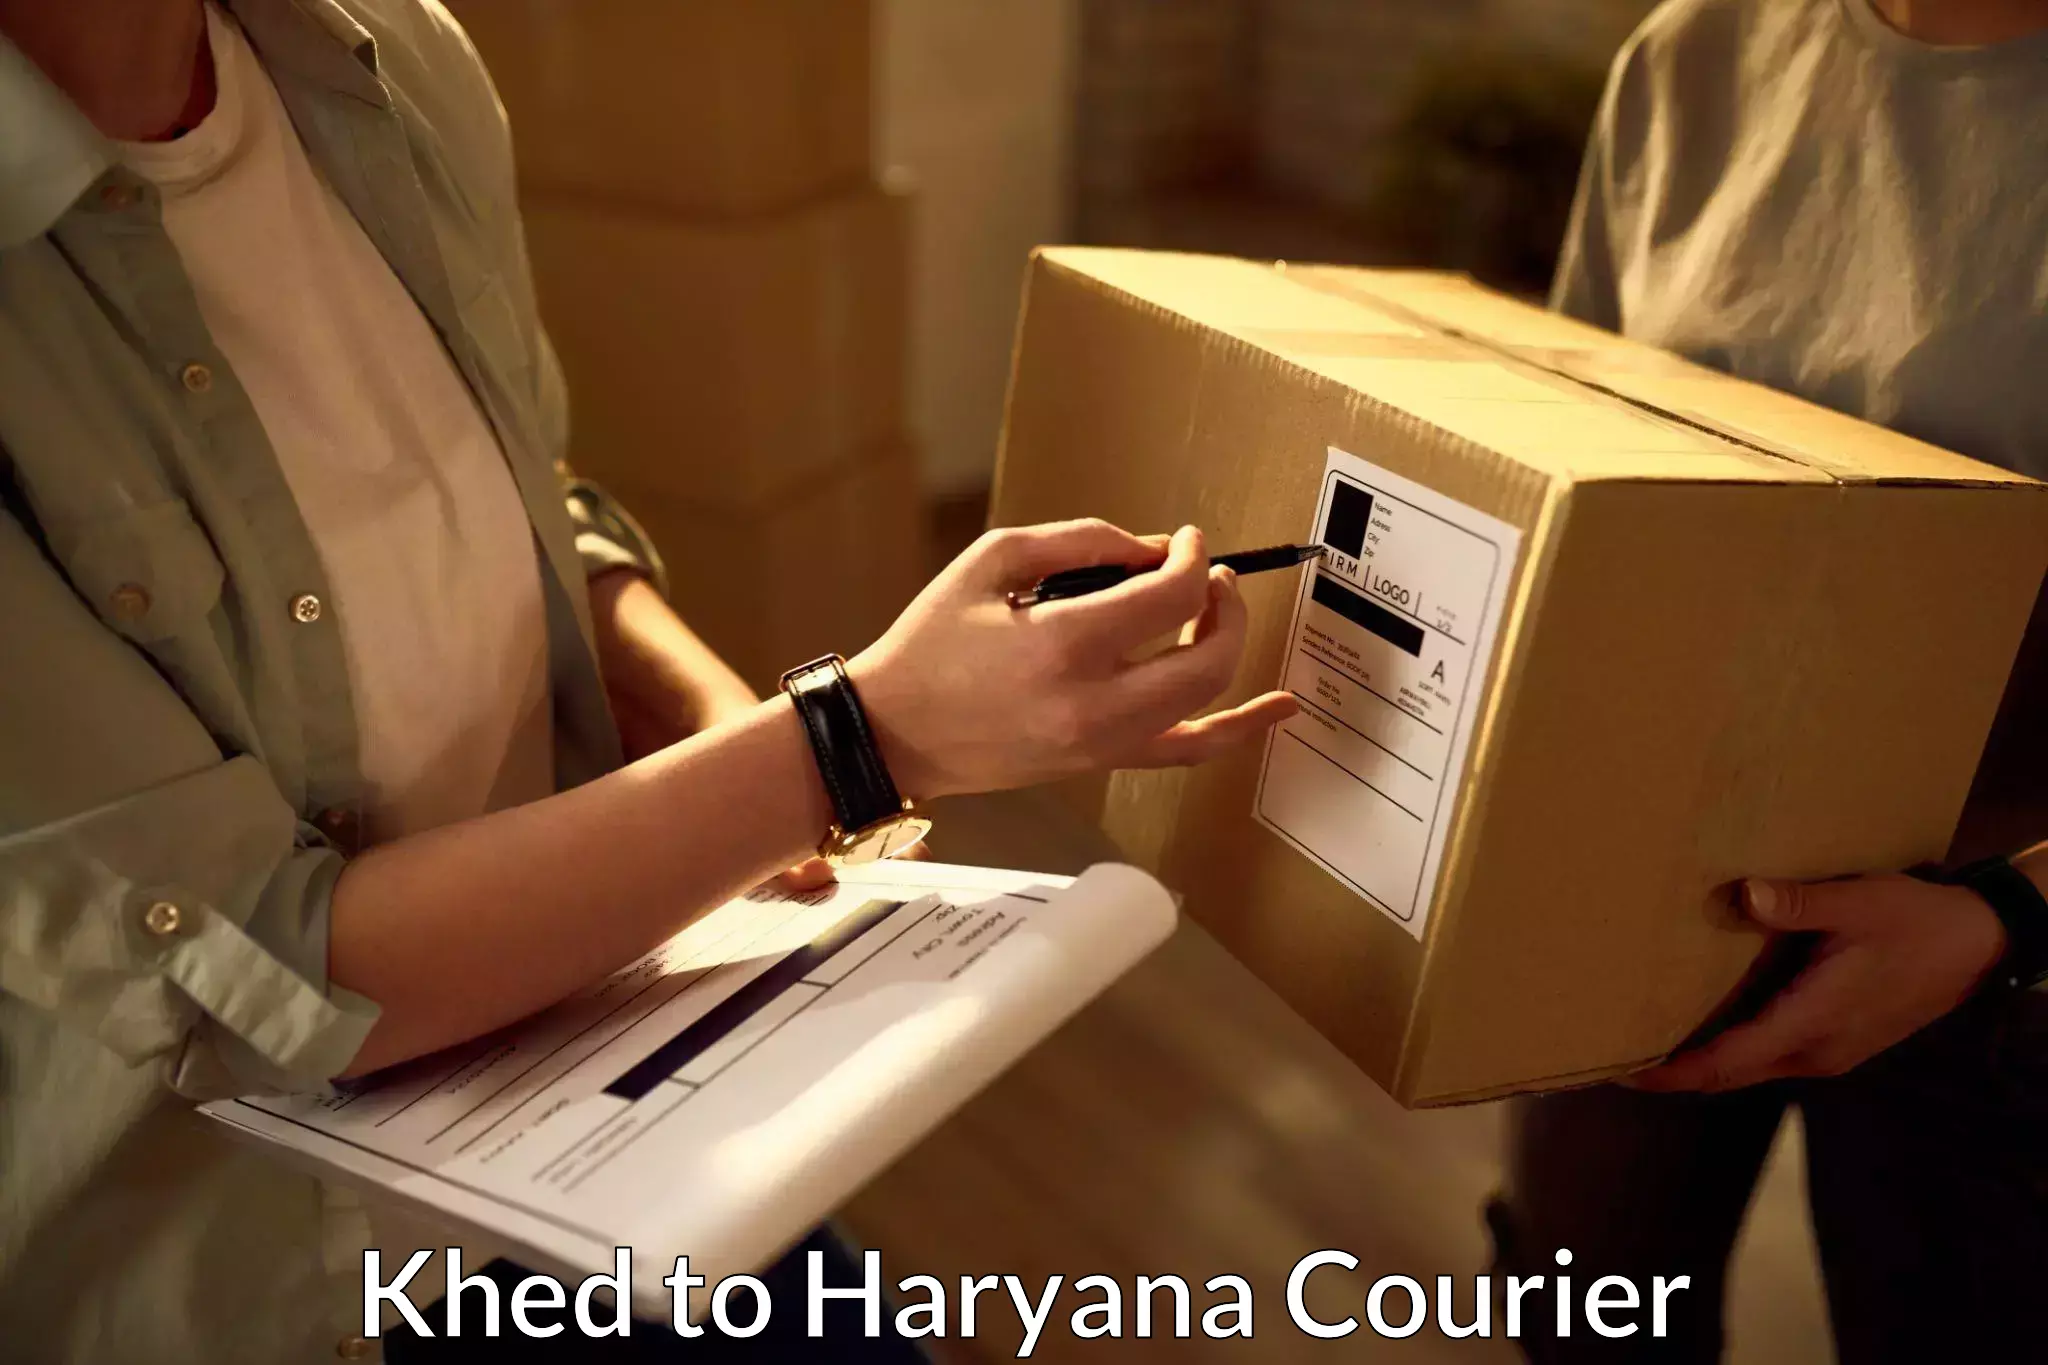 Courier app Khed to NCR Haryana